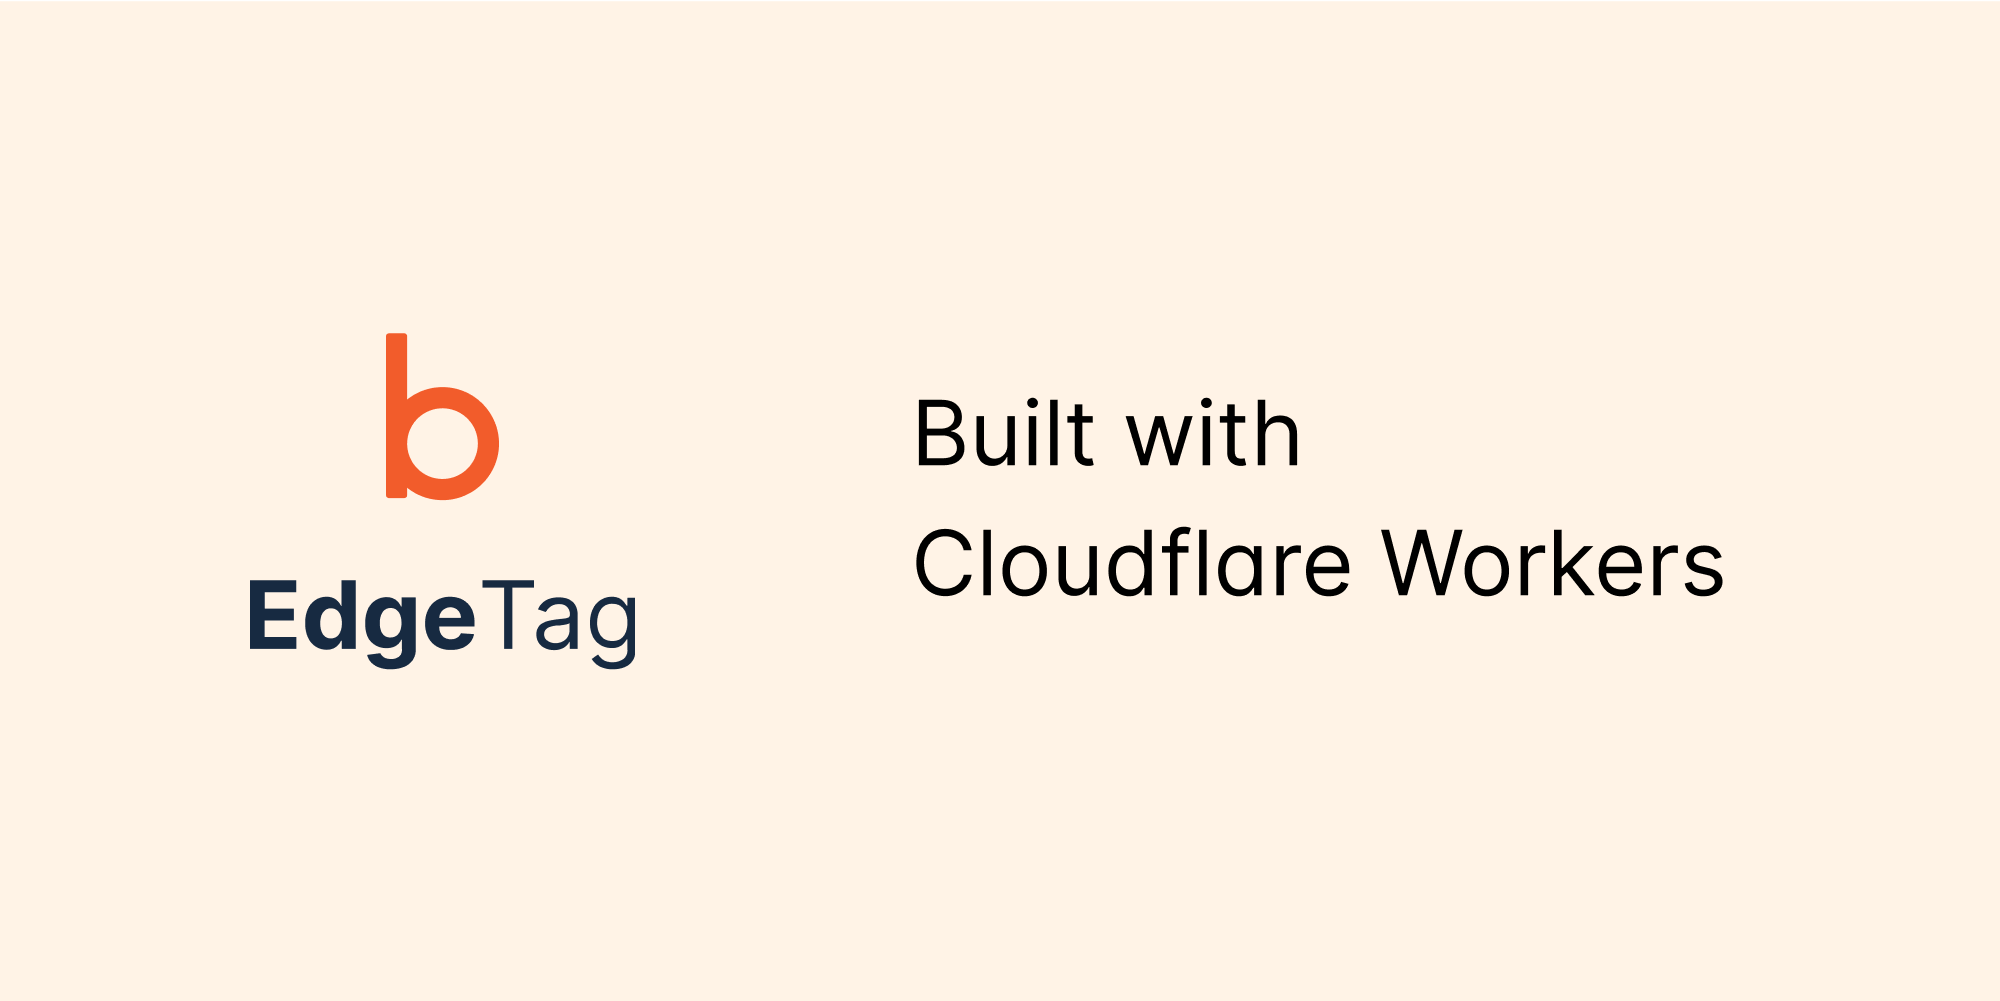 Building the future with Cloudflare Workers